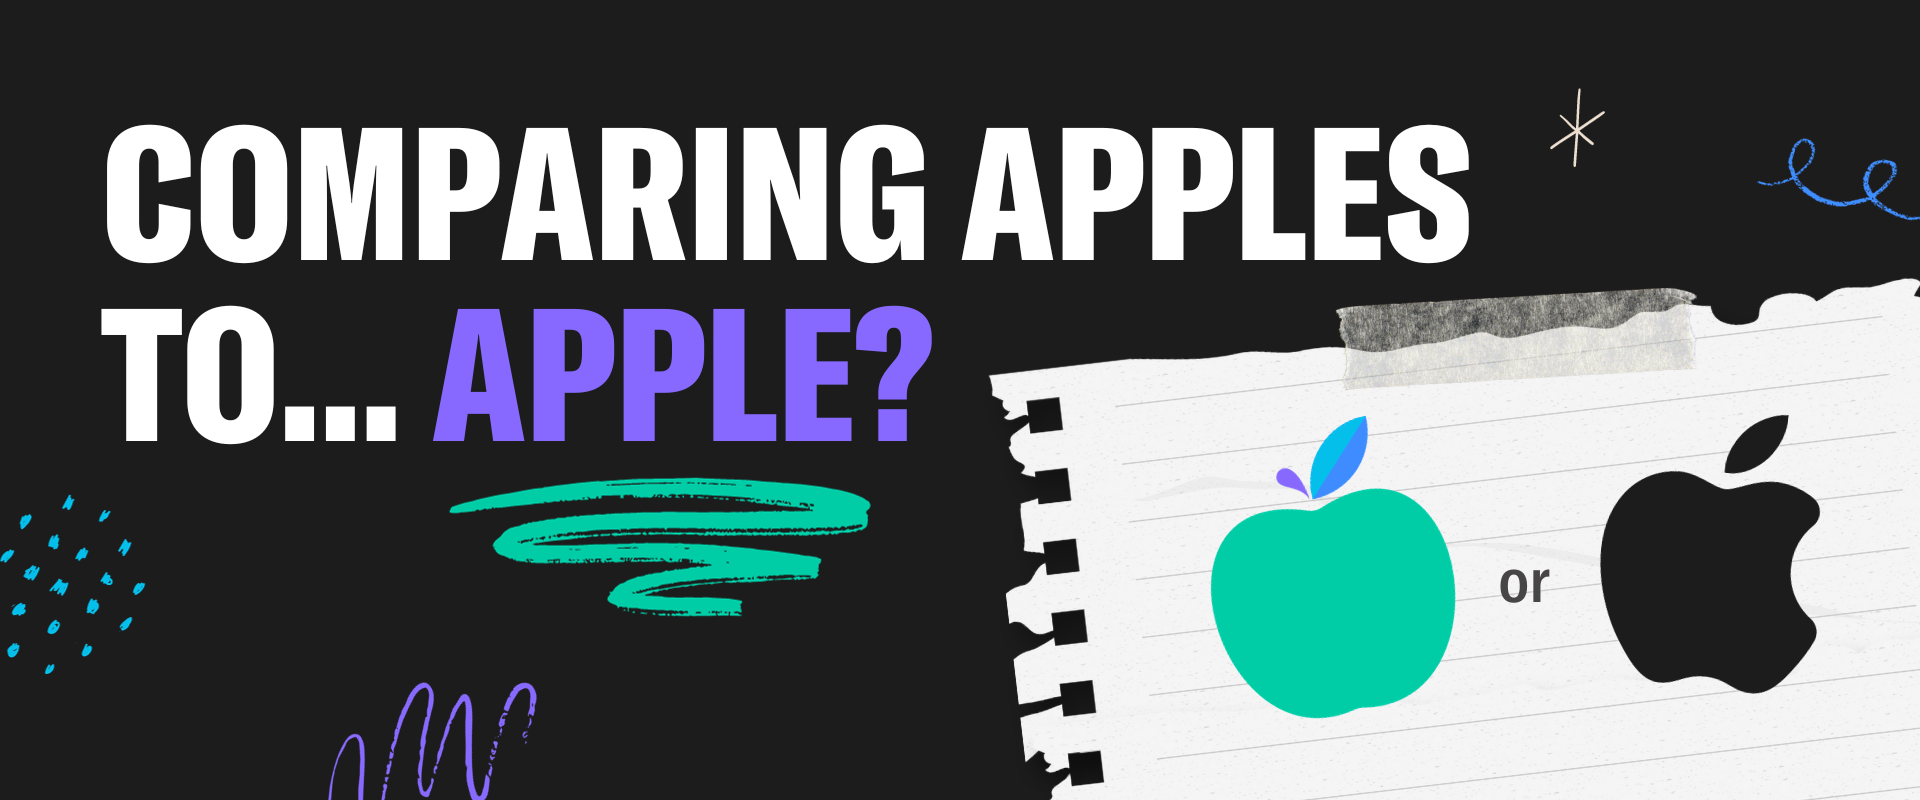 Comparing apple to apples